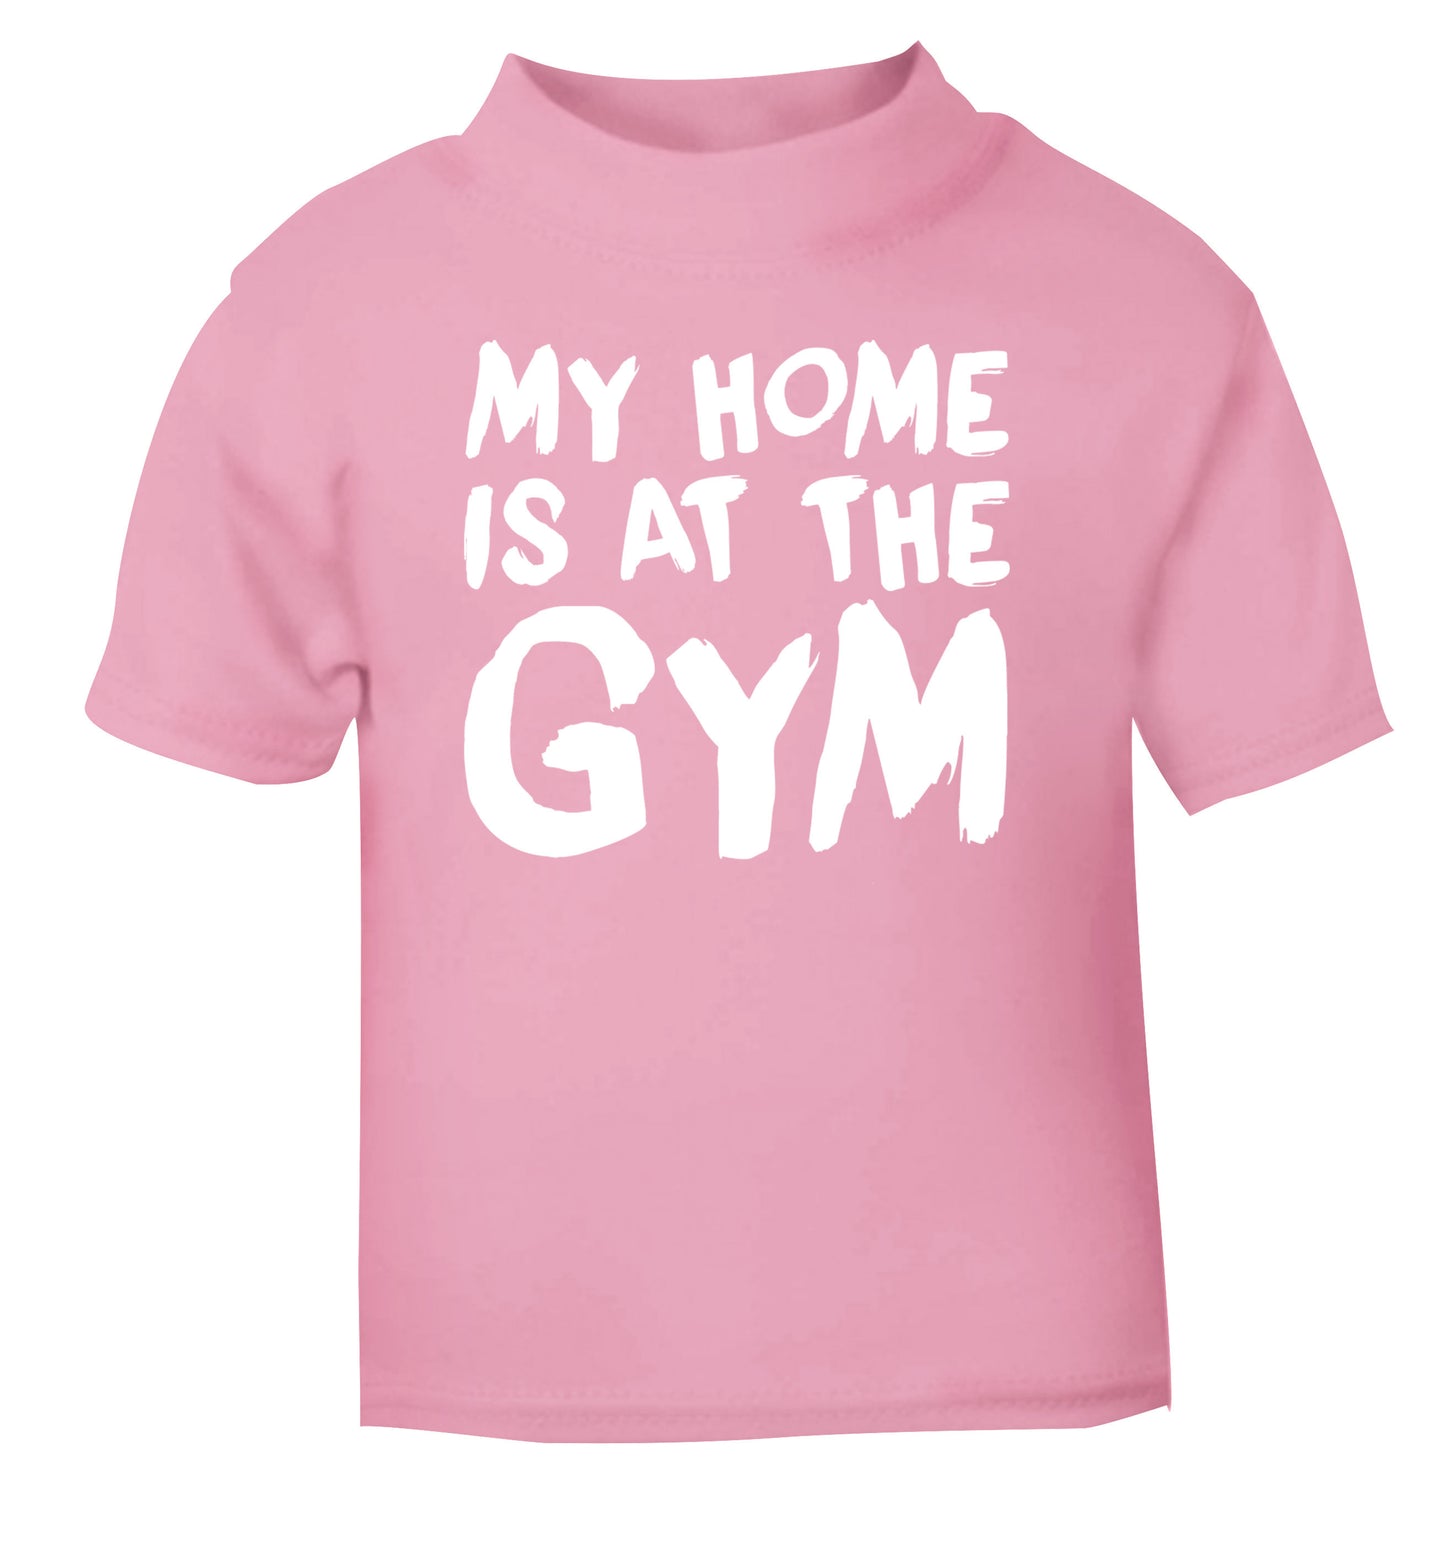 My home is at the gym light pink Baby Toddler Tshirt 2 Years